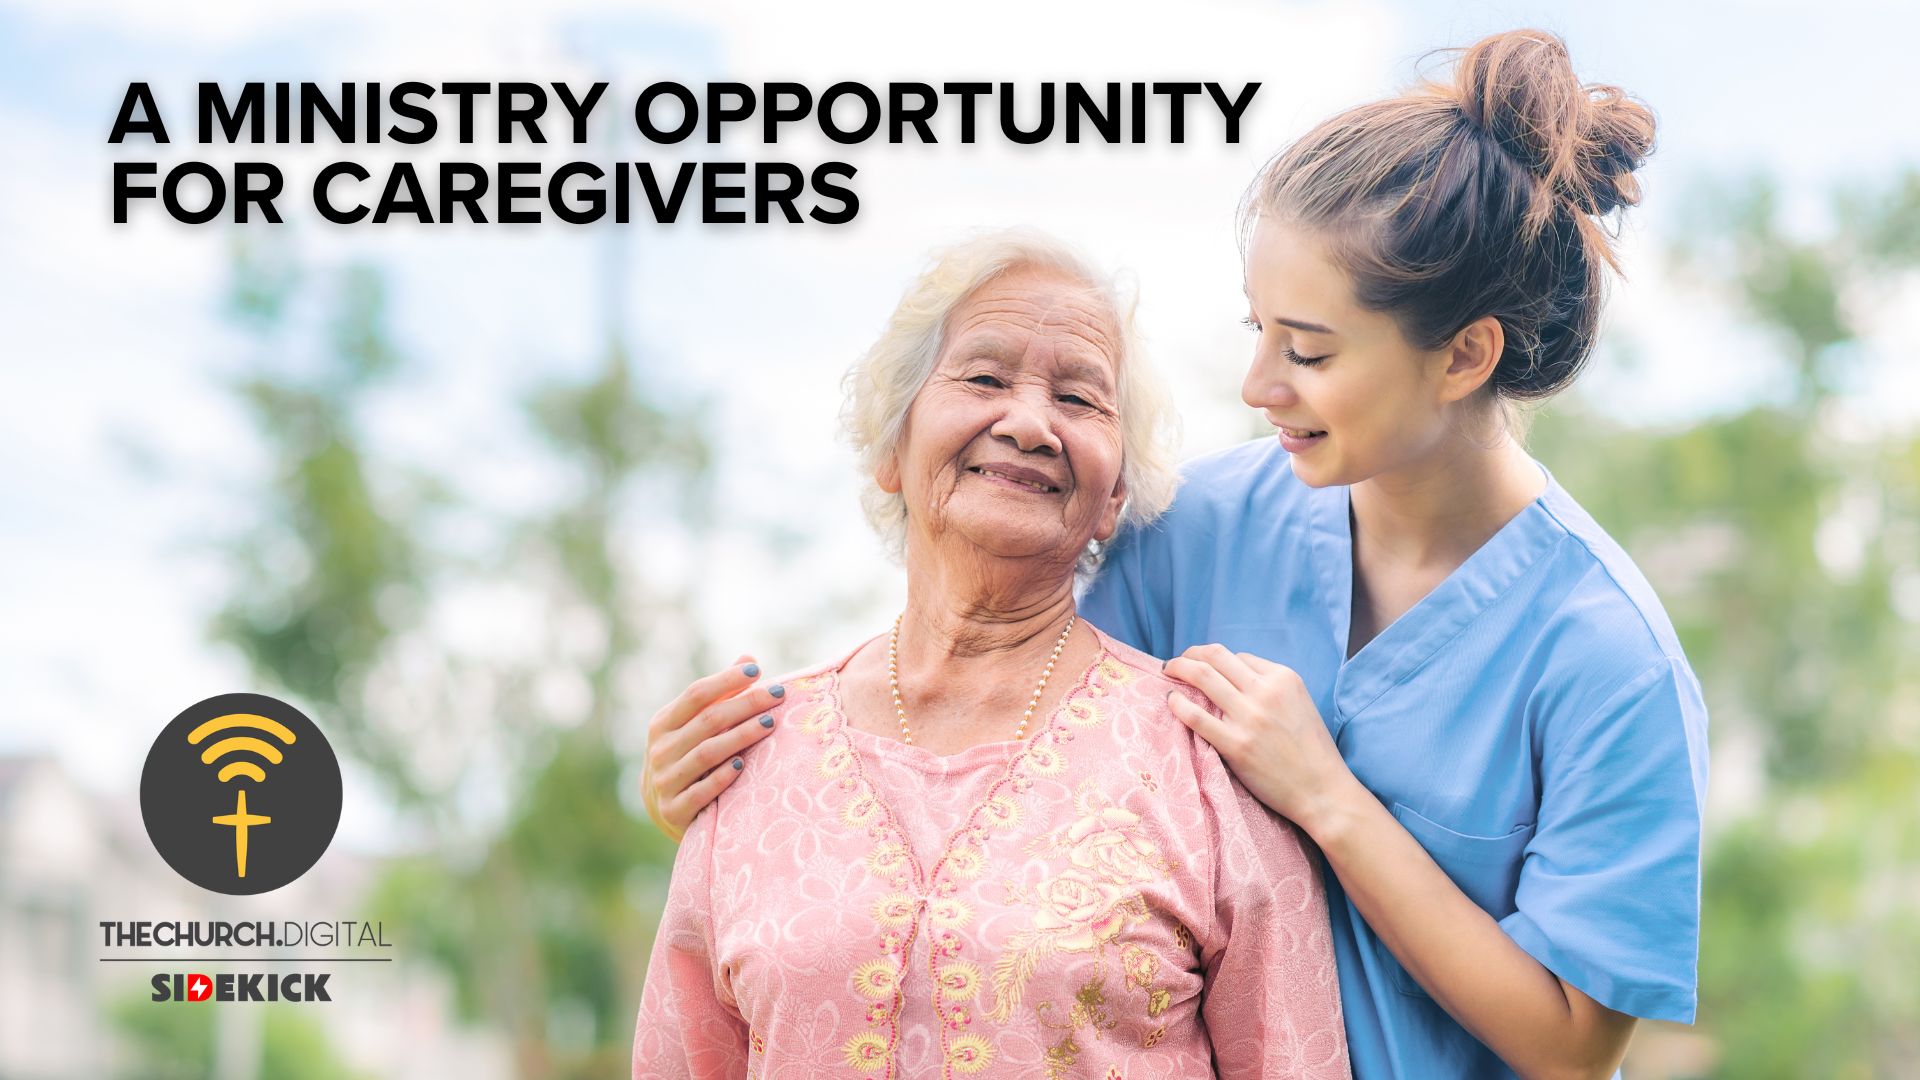 A Ministry Opportunity for Caregivers